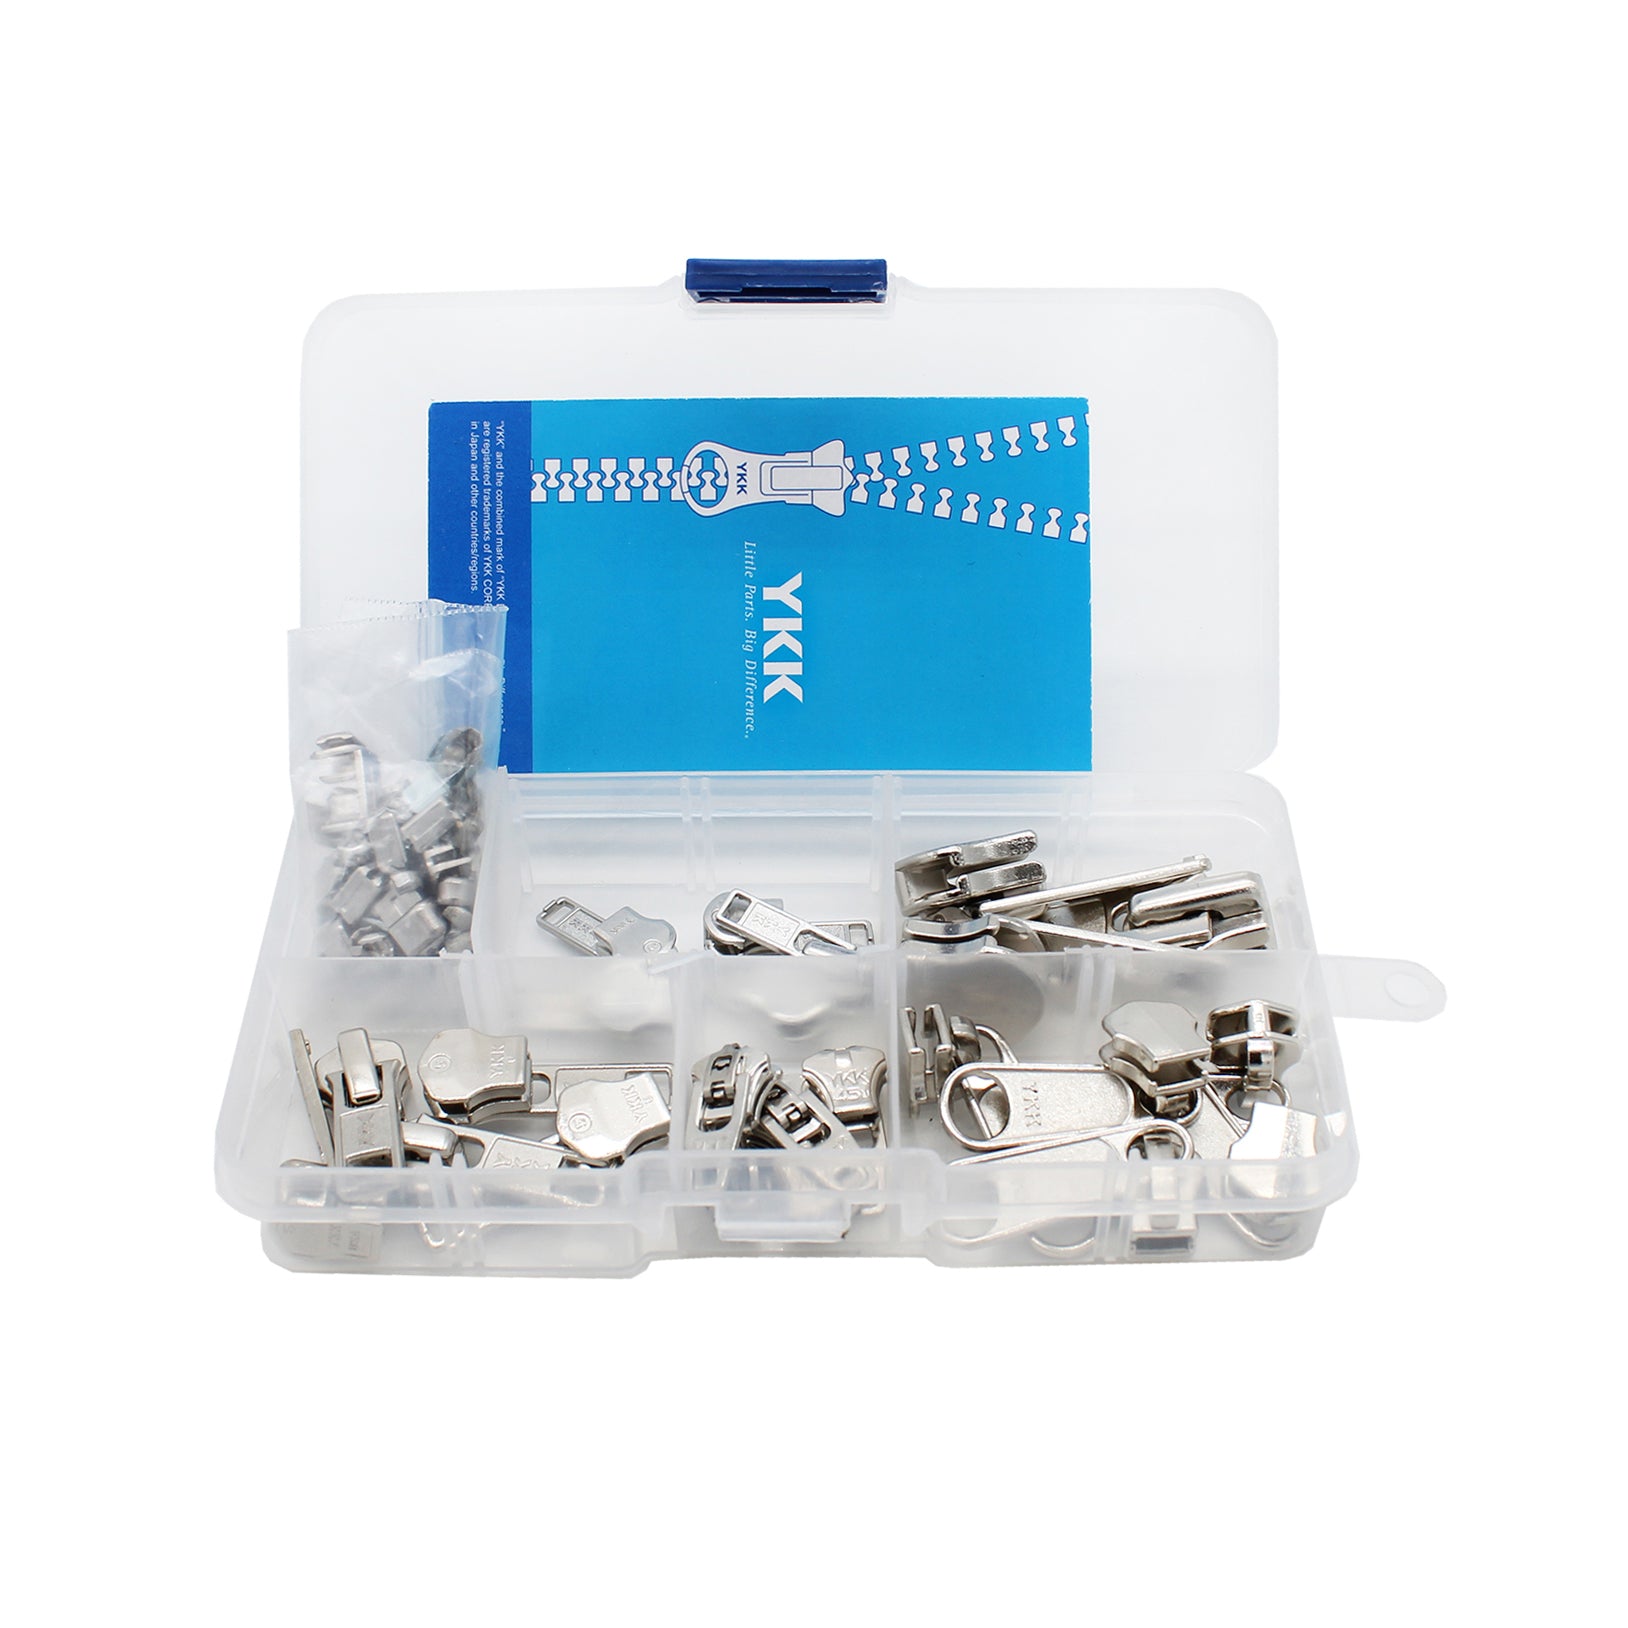 Zipper Repair Kit - #5 Vislon Auto Lock Sliders - 3 Universal Sliders and  Stops Included - Made in The United States